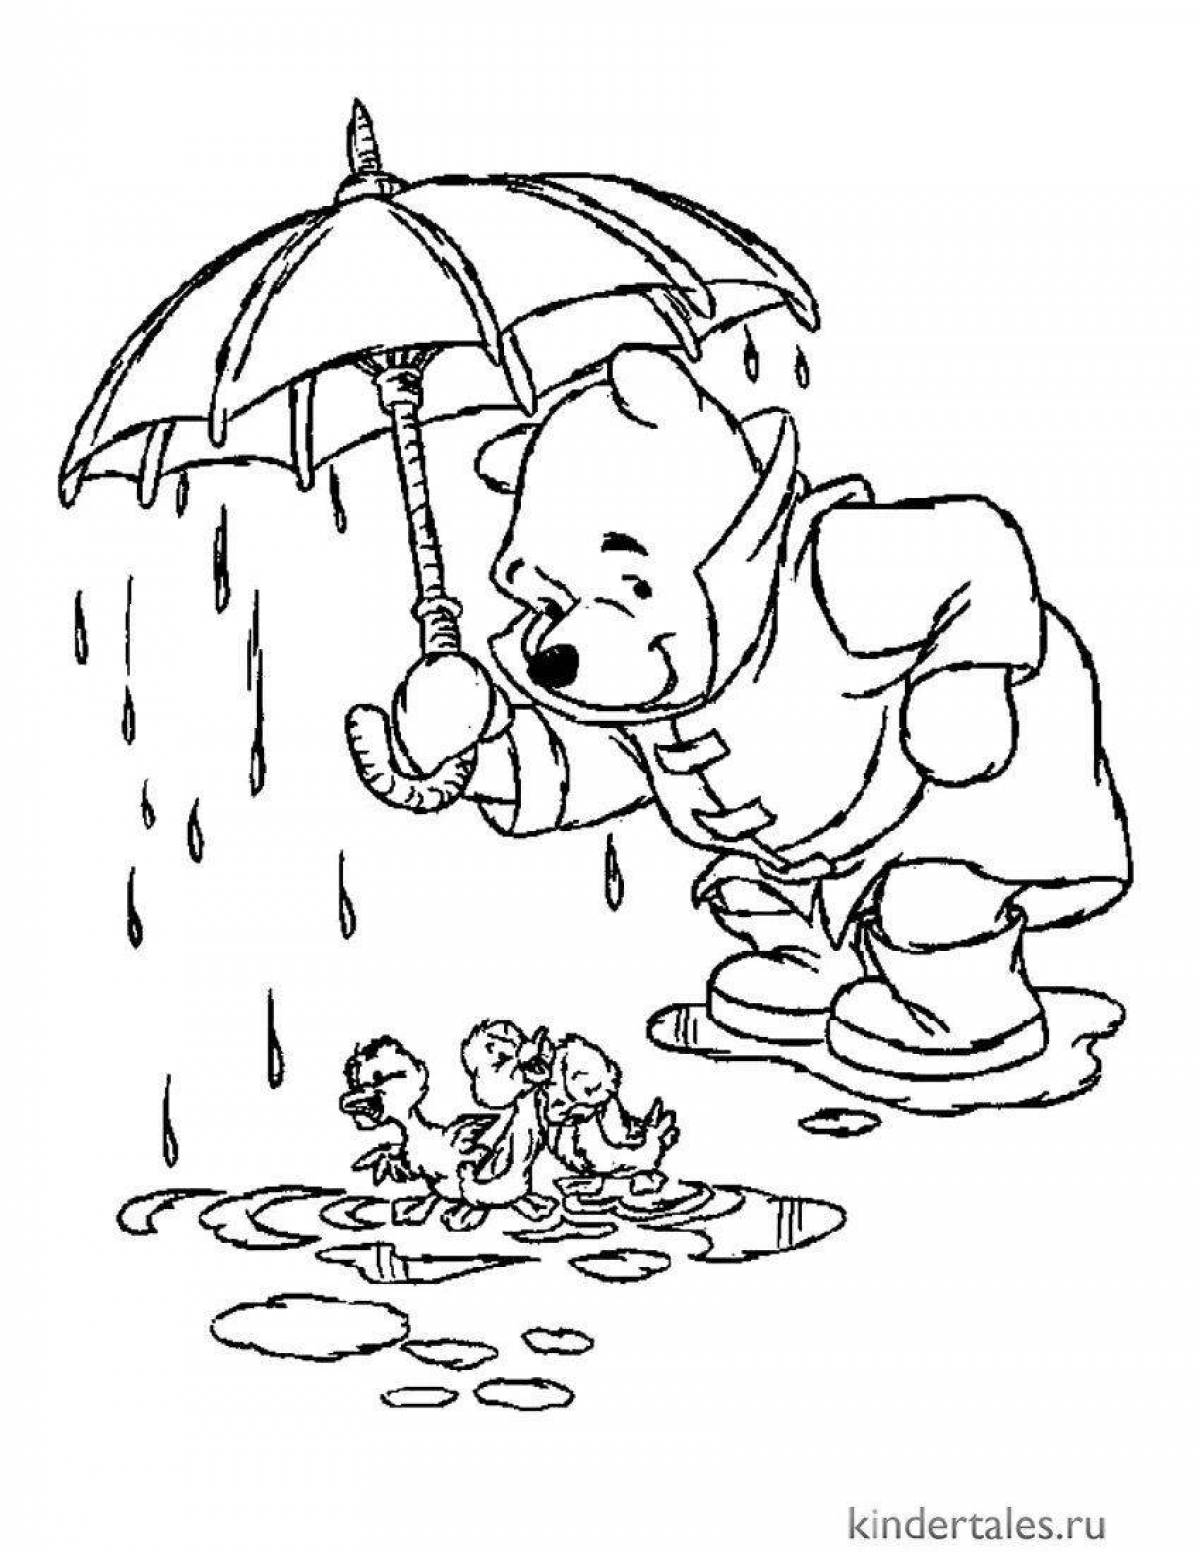 Good deeds humorous coloring pages